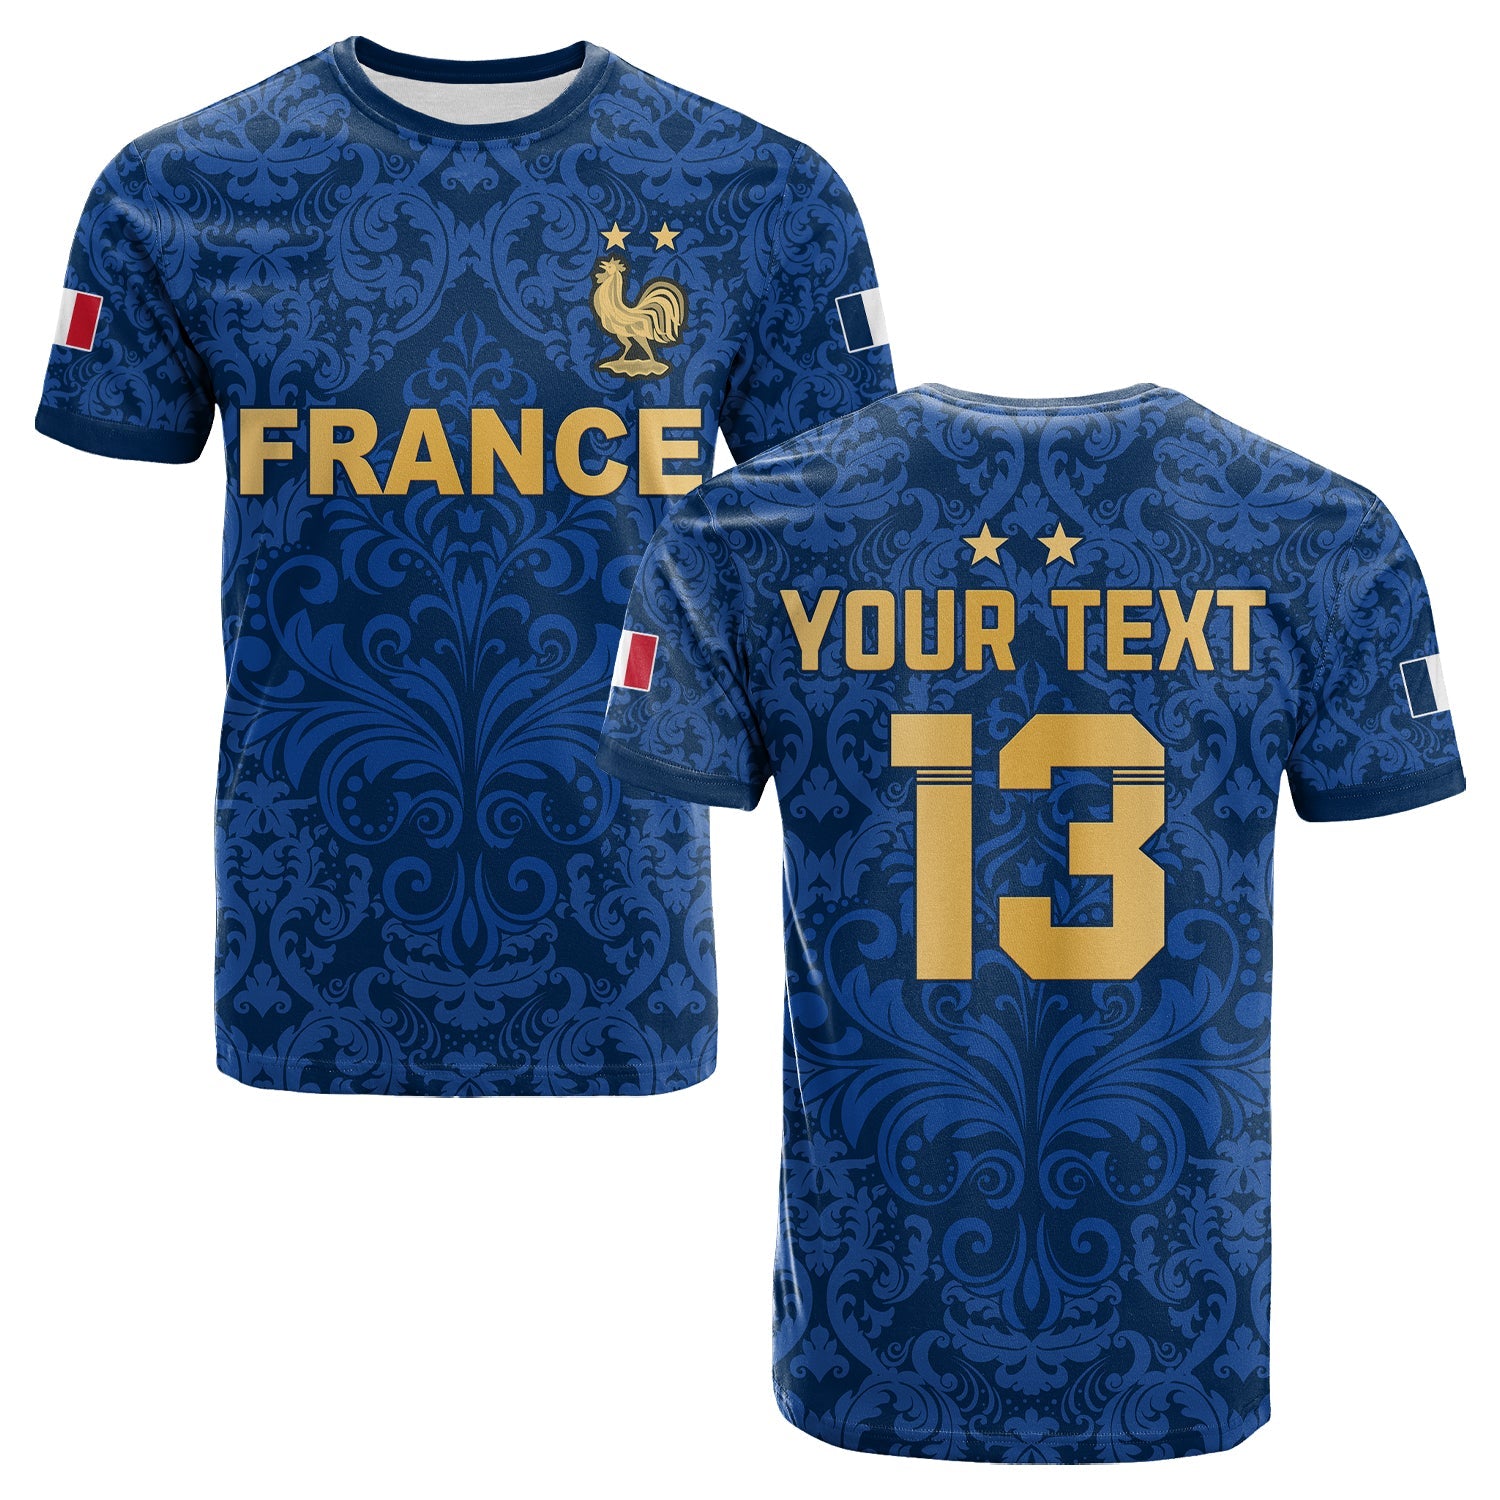 custom-text-and-number-france-football-t-shirt-elegant-lily-world-cup-les-bleus-le-champion